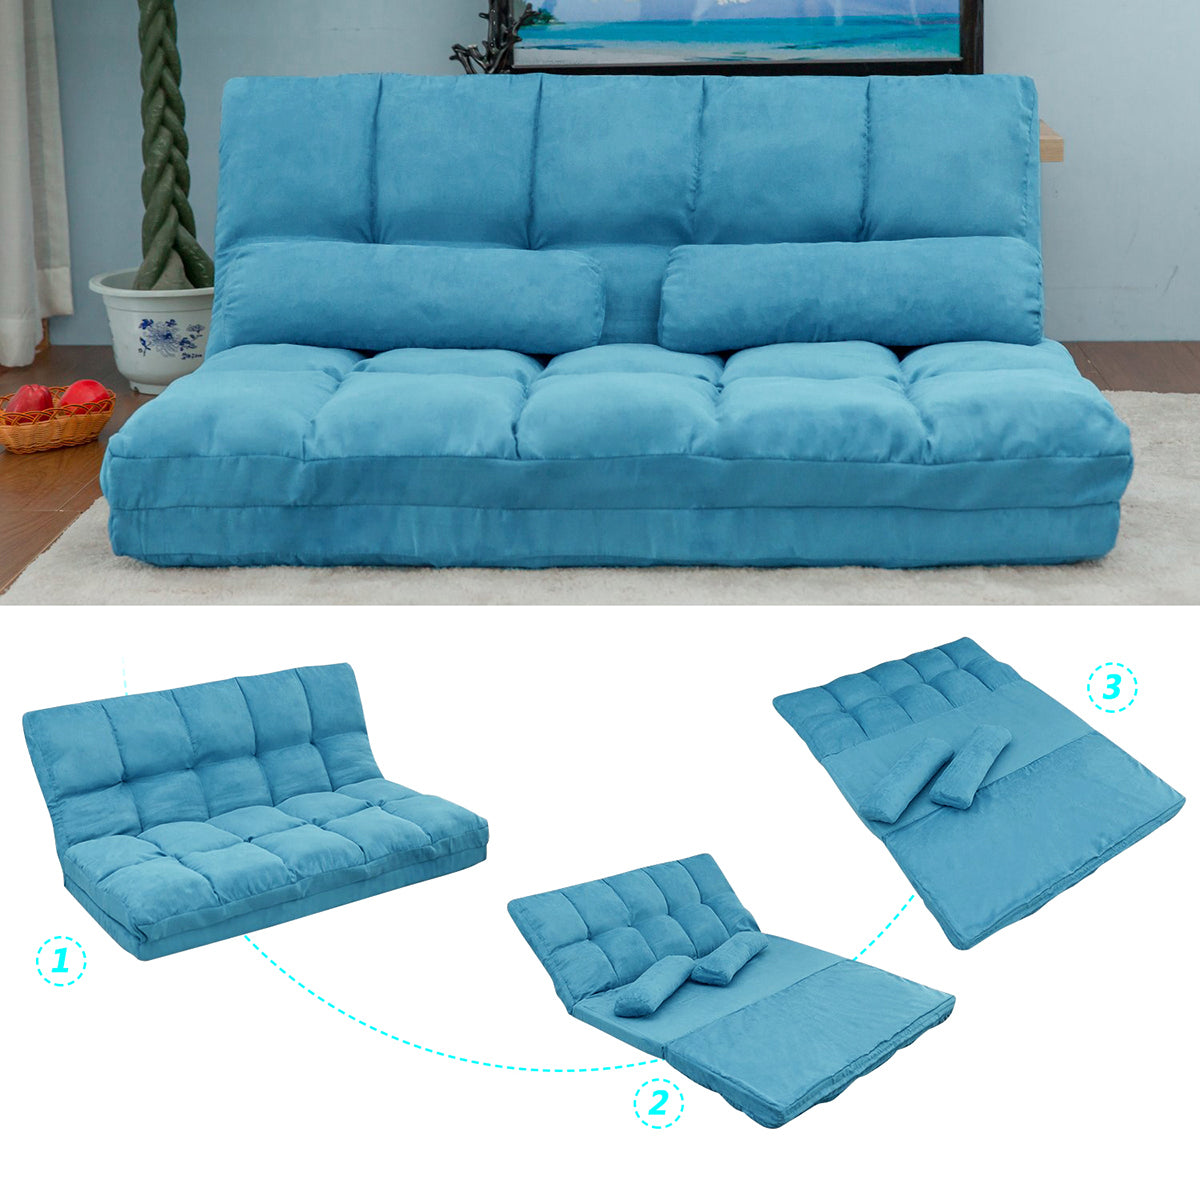 Double Chaise Lounge Futon Sofa Floor Couch with Two Pillows (Blue)